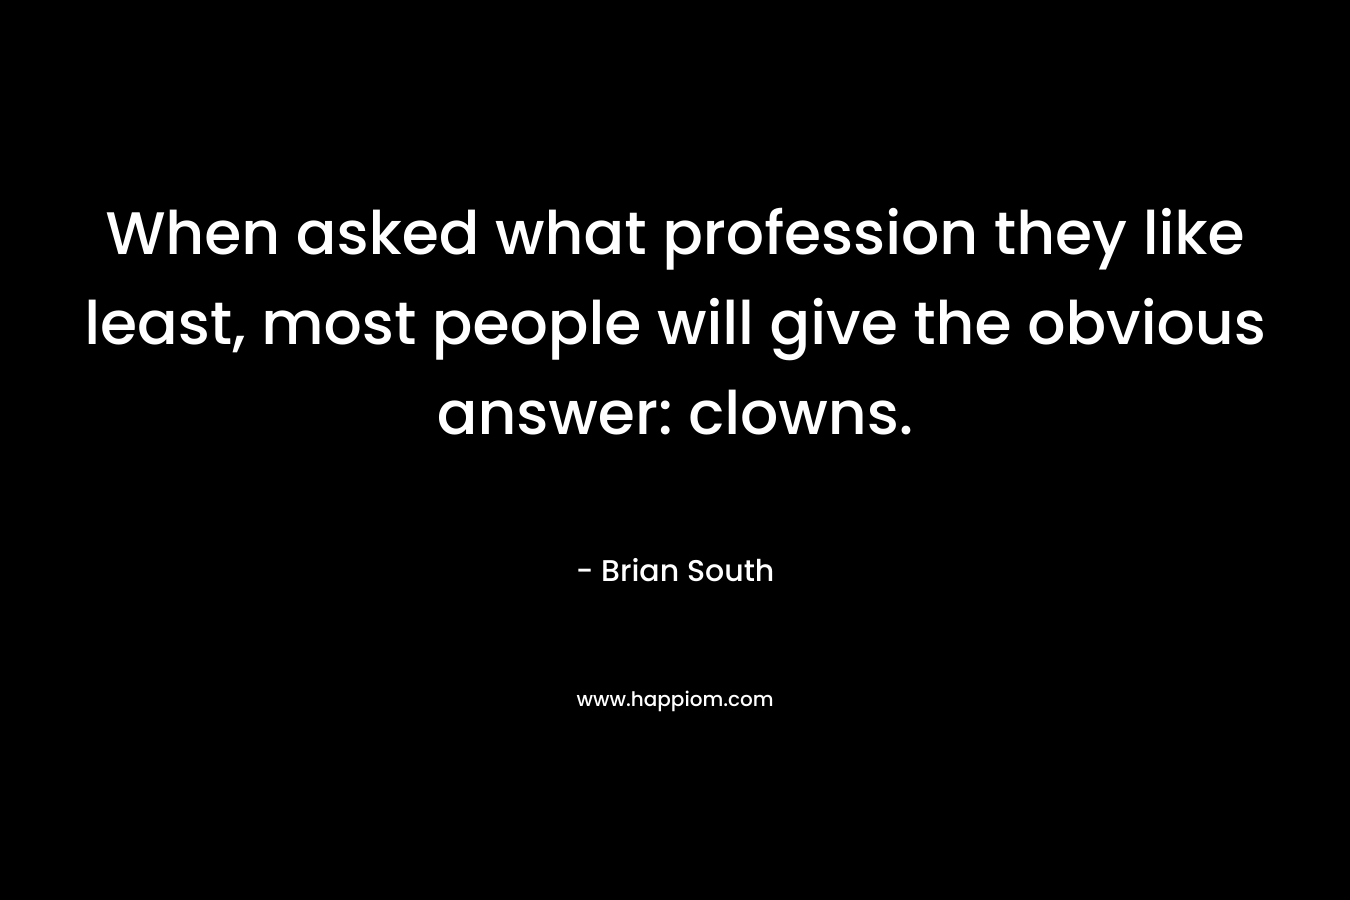 When asked what profession they like least, most people will give the obvious answer: clowns.